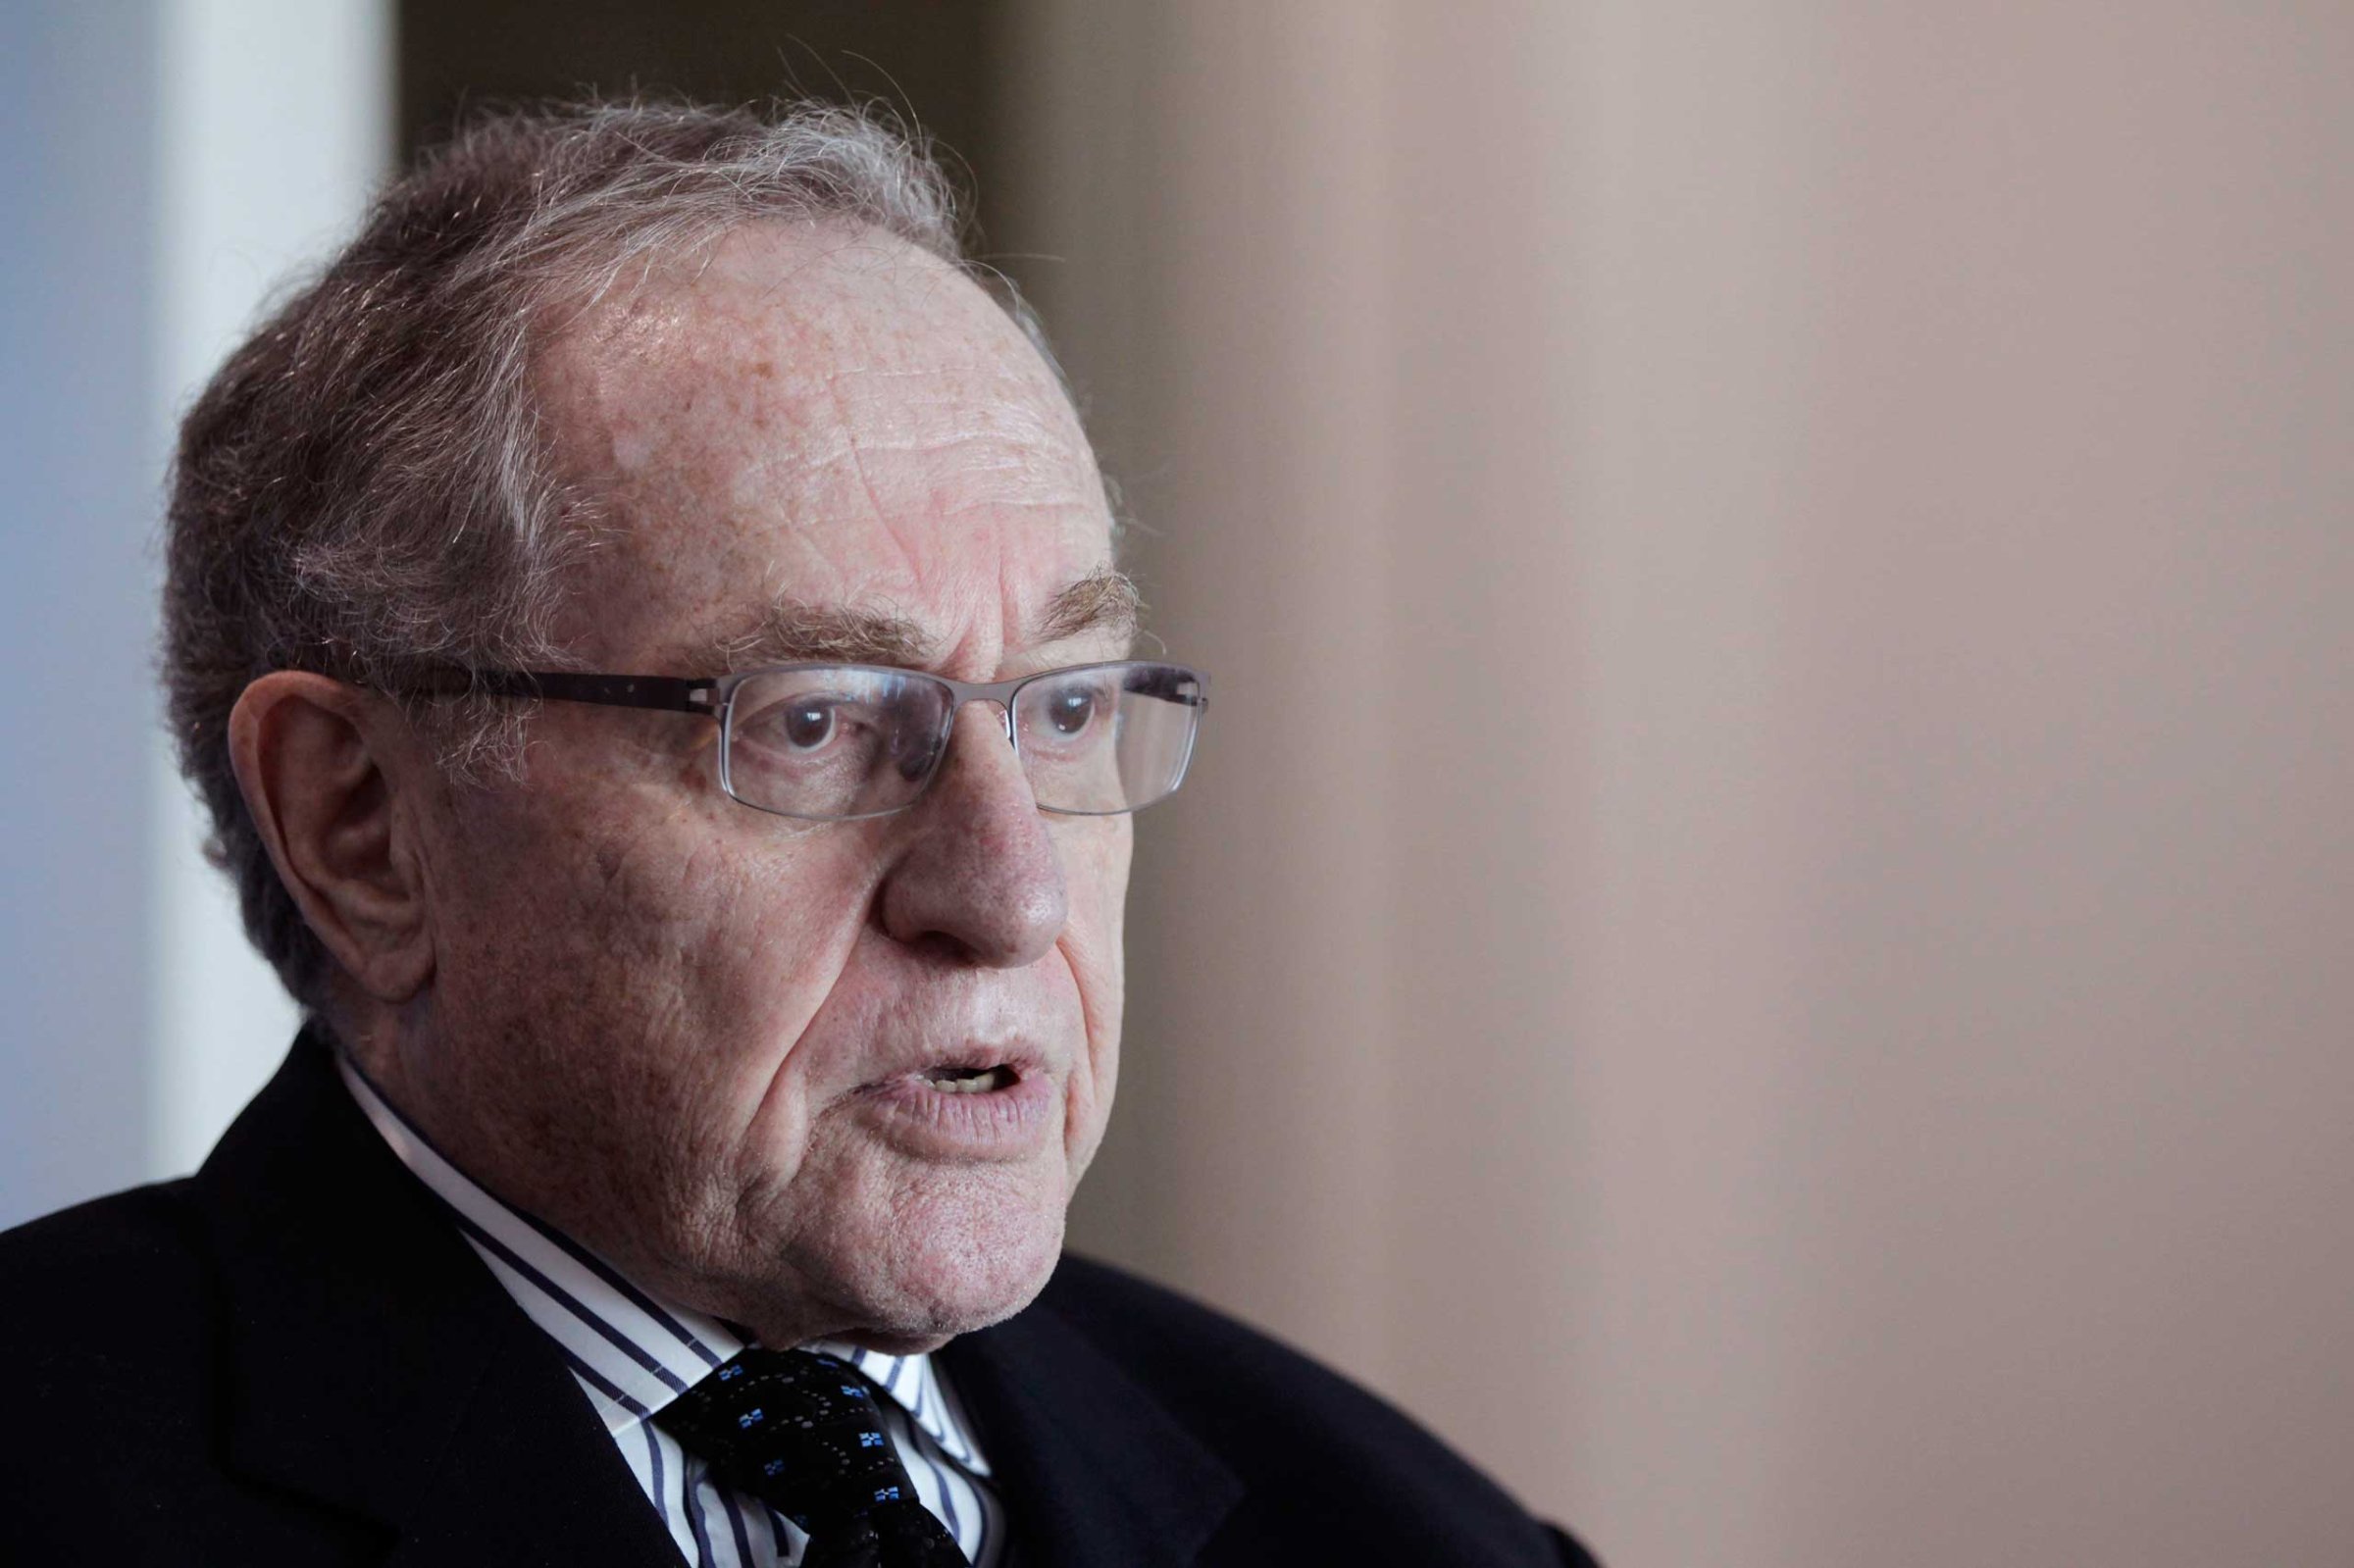 Attorney and law professor Alan Dershowitz discusses allegations of sex with an underage girl levelled against him, during an interview at his home in Miami Beach